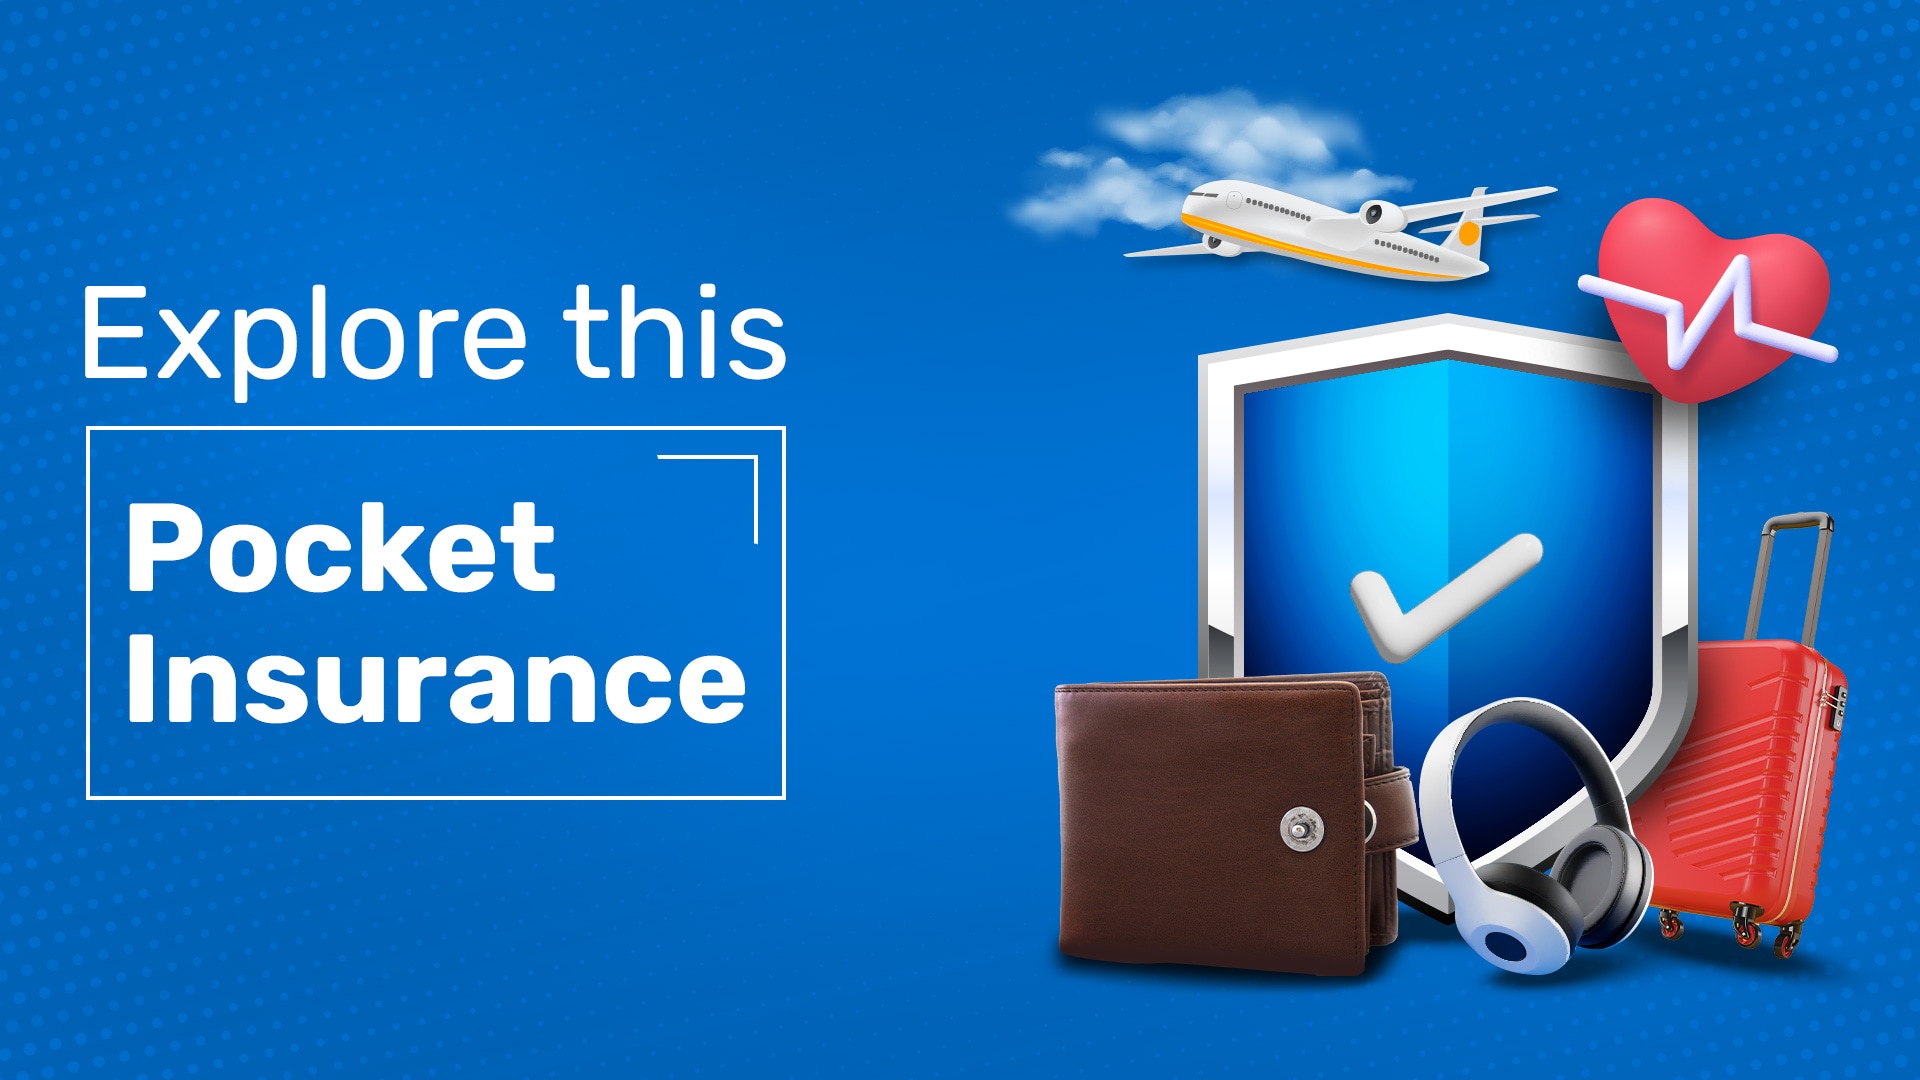 Wallet Care is Your Superhero - But Hurry, This Deal Won't Last!